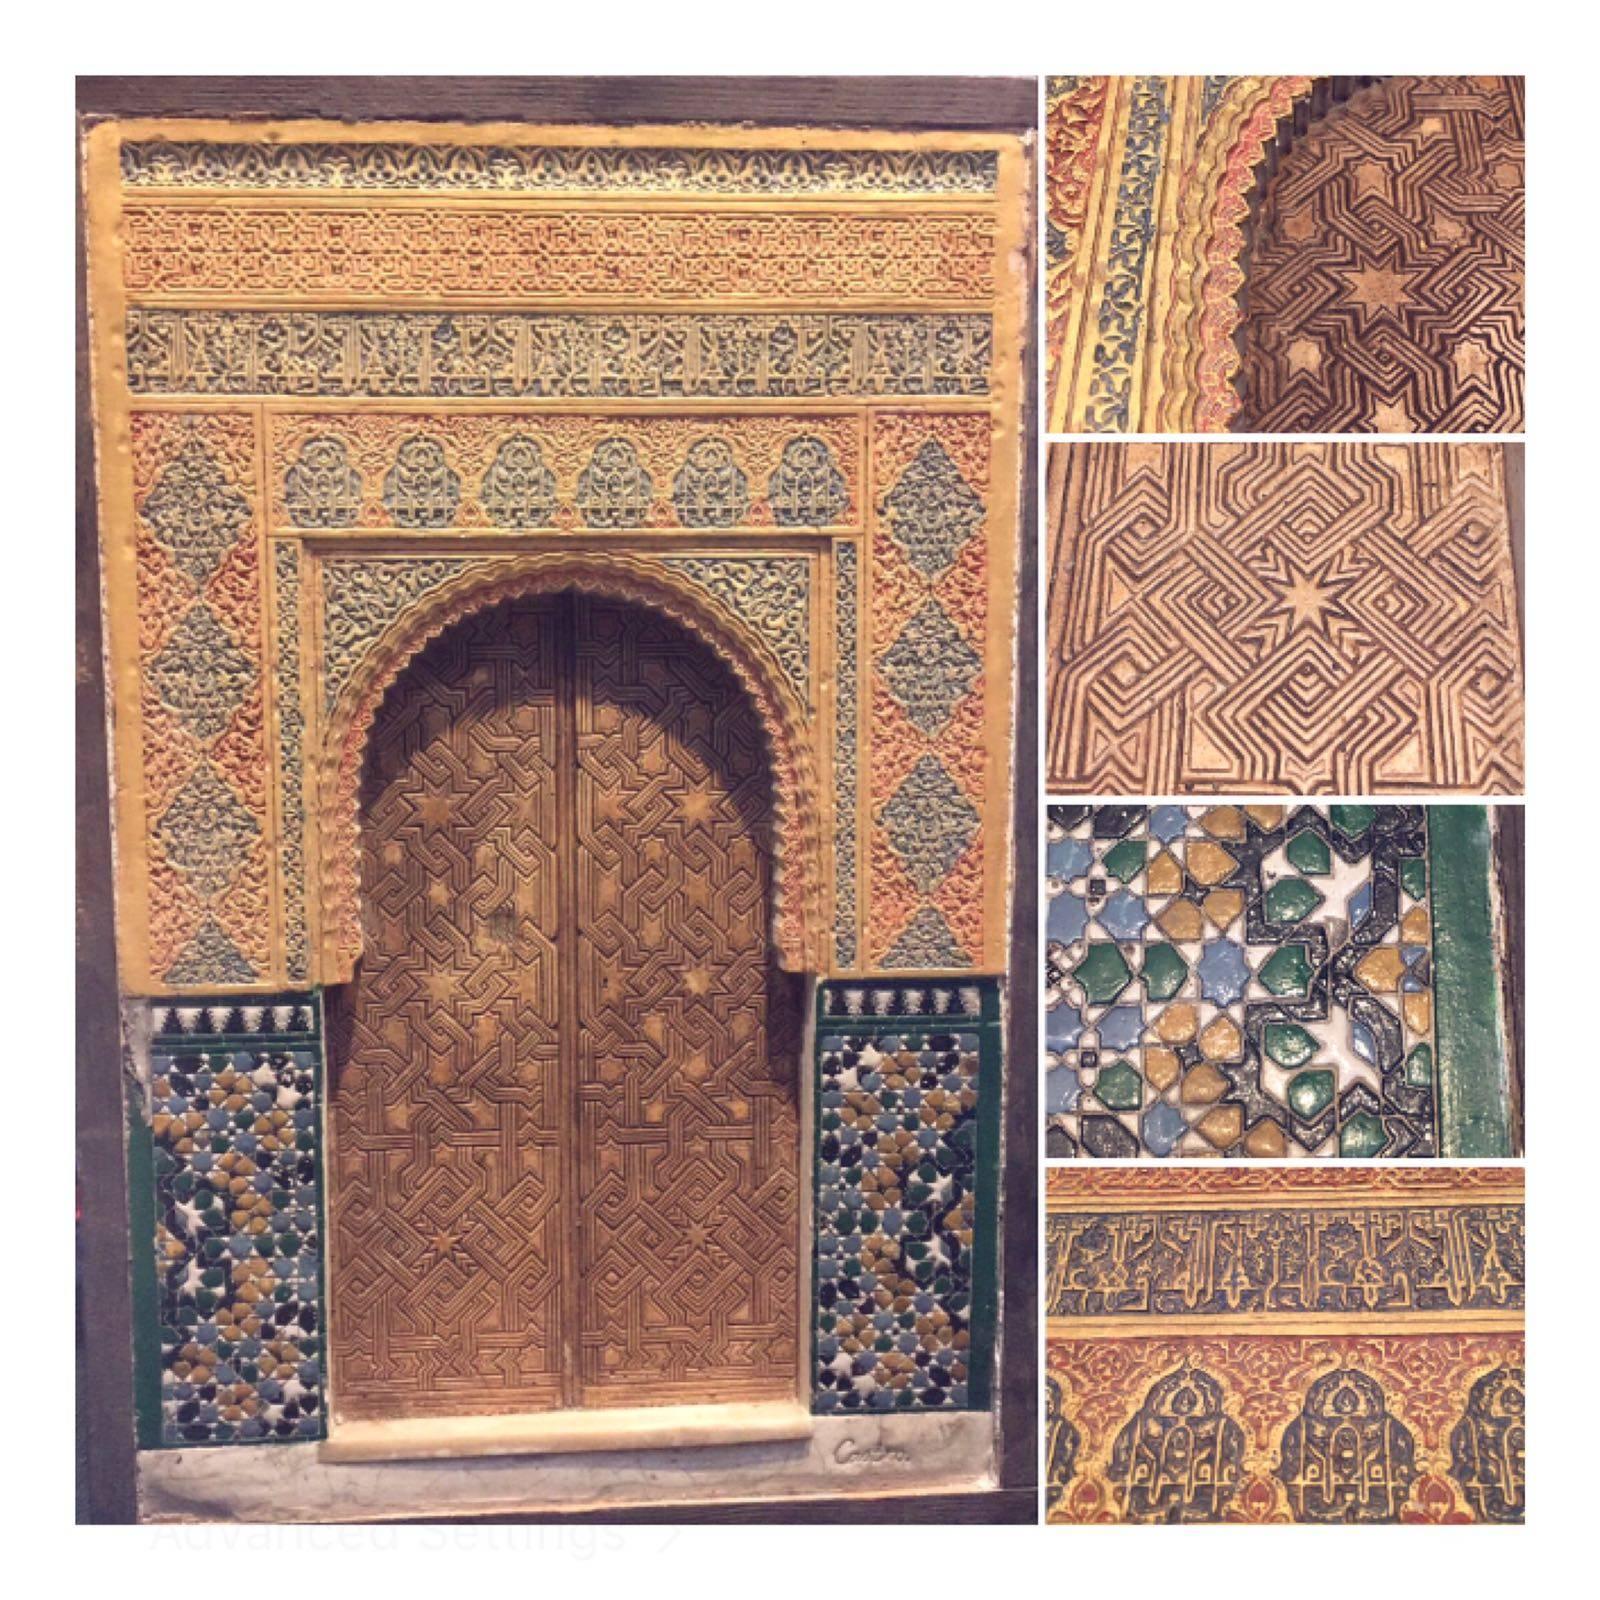 Painted and carved plaster plaque of the Alhambra, Granada, late 19th century by Diego Fernandez Castro; rectangular.